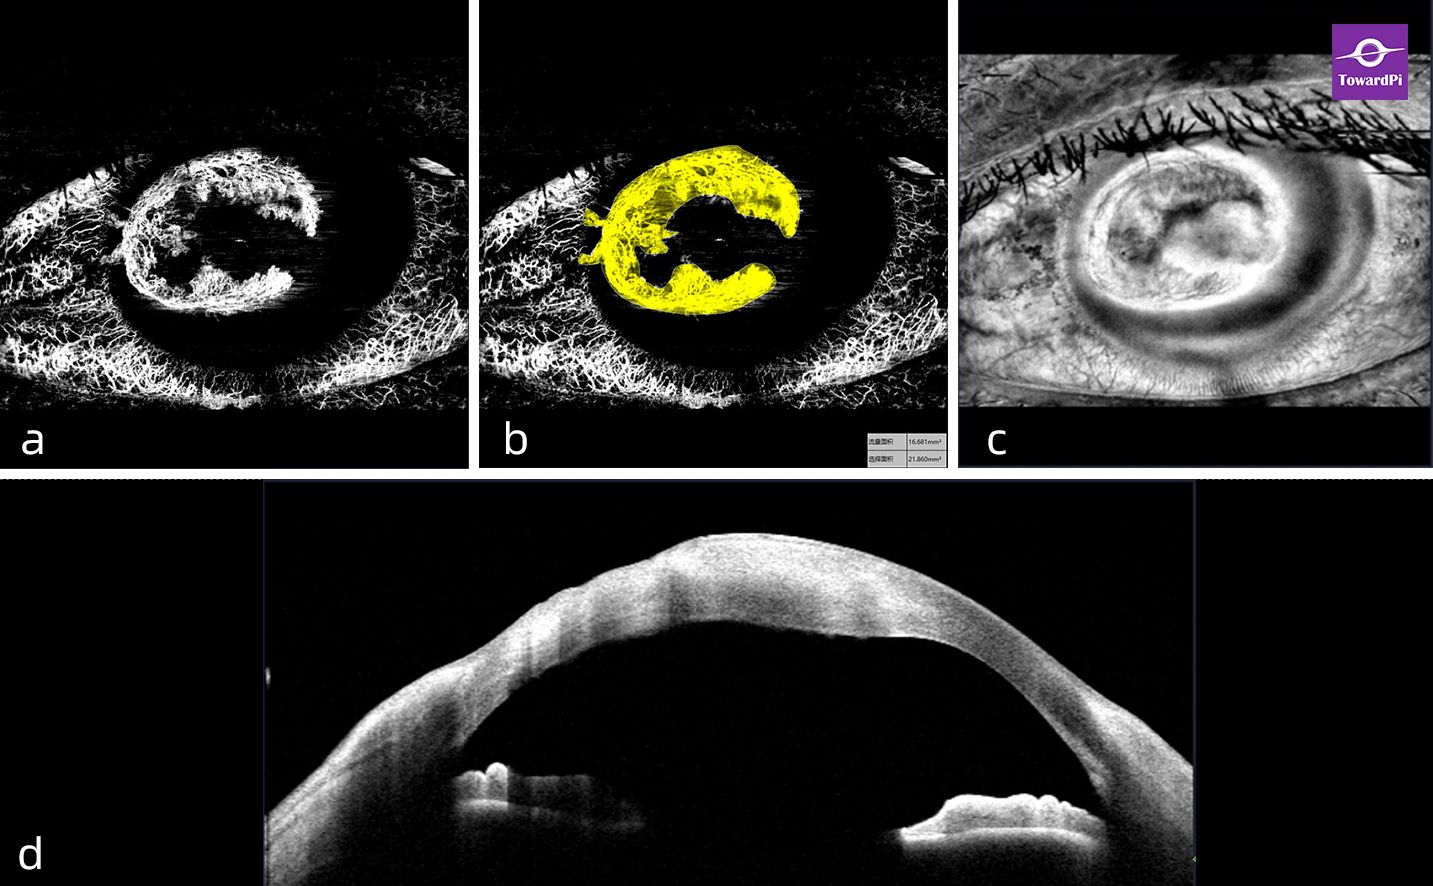 Virus Keratohelcosis with Secondary Corneal Neovascularization Captured by AS-OCTA